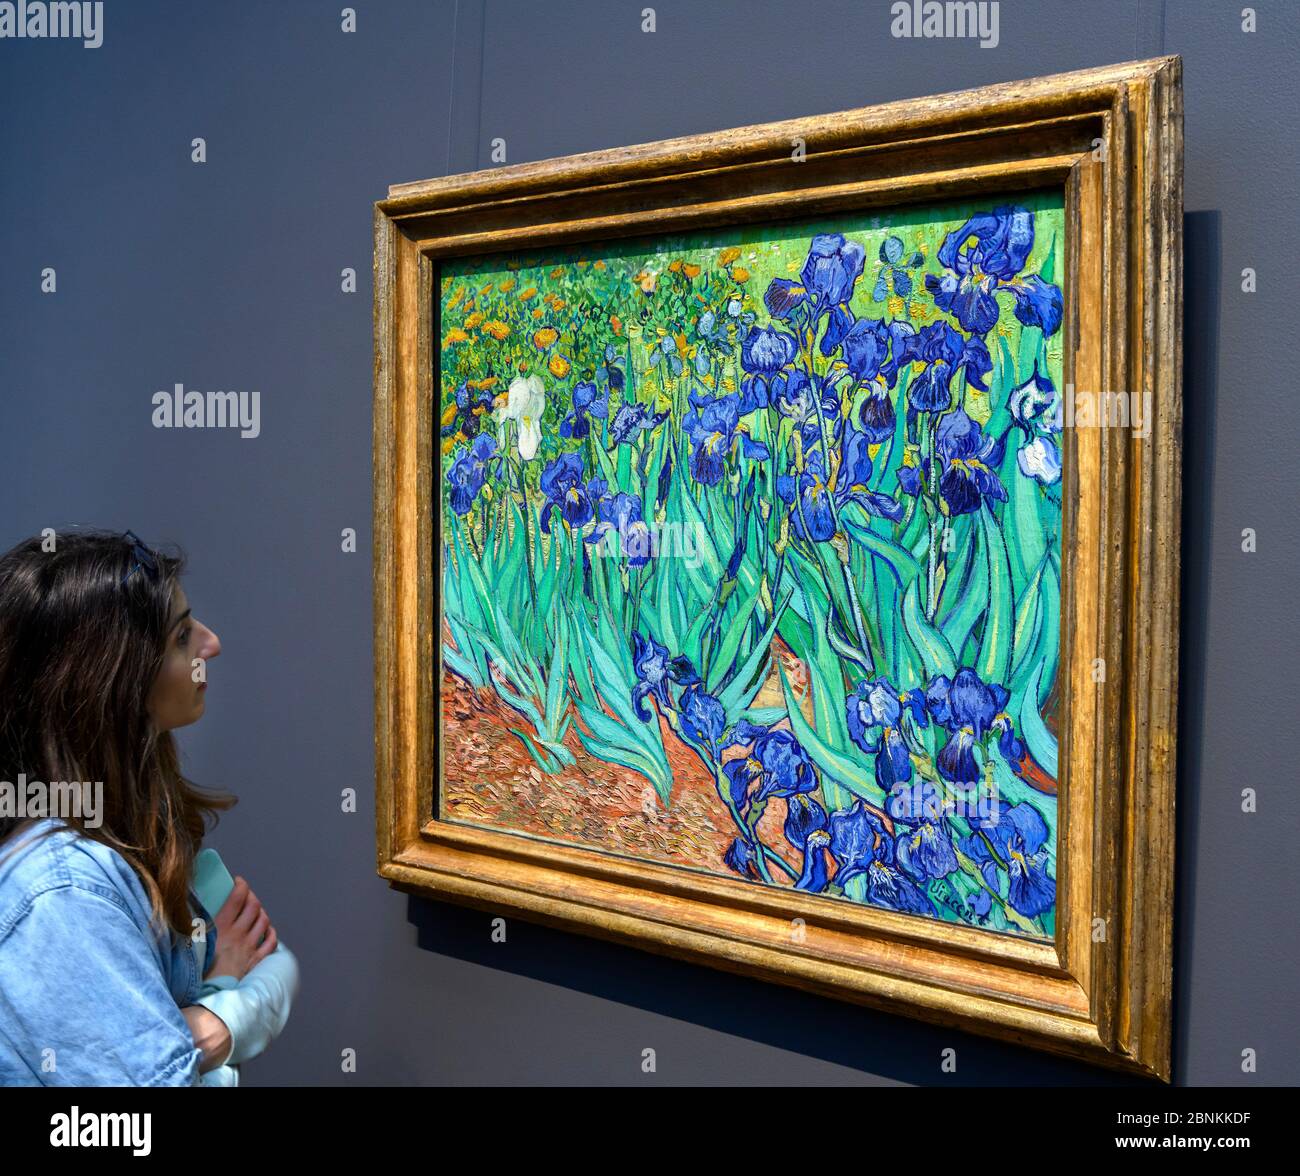 Woman looking at the painting 'Irises' by Vincent van Gogh, The Getty Center museum, Los Angeles, California, USA Stock Photo